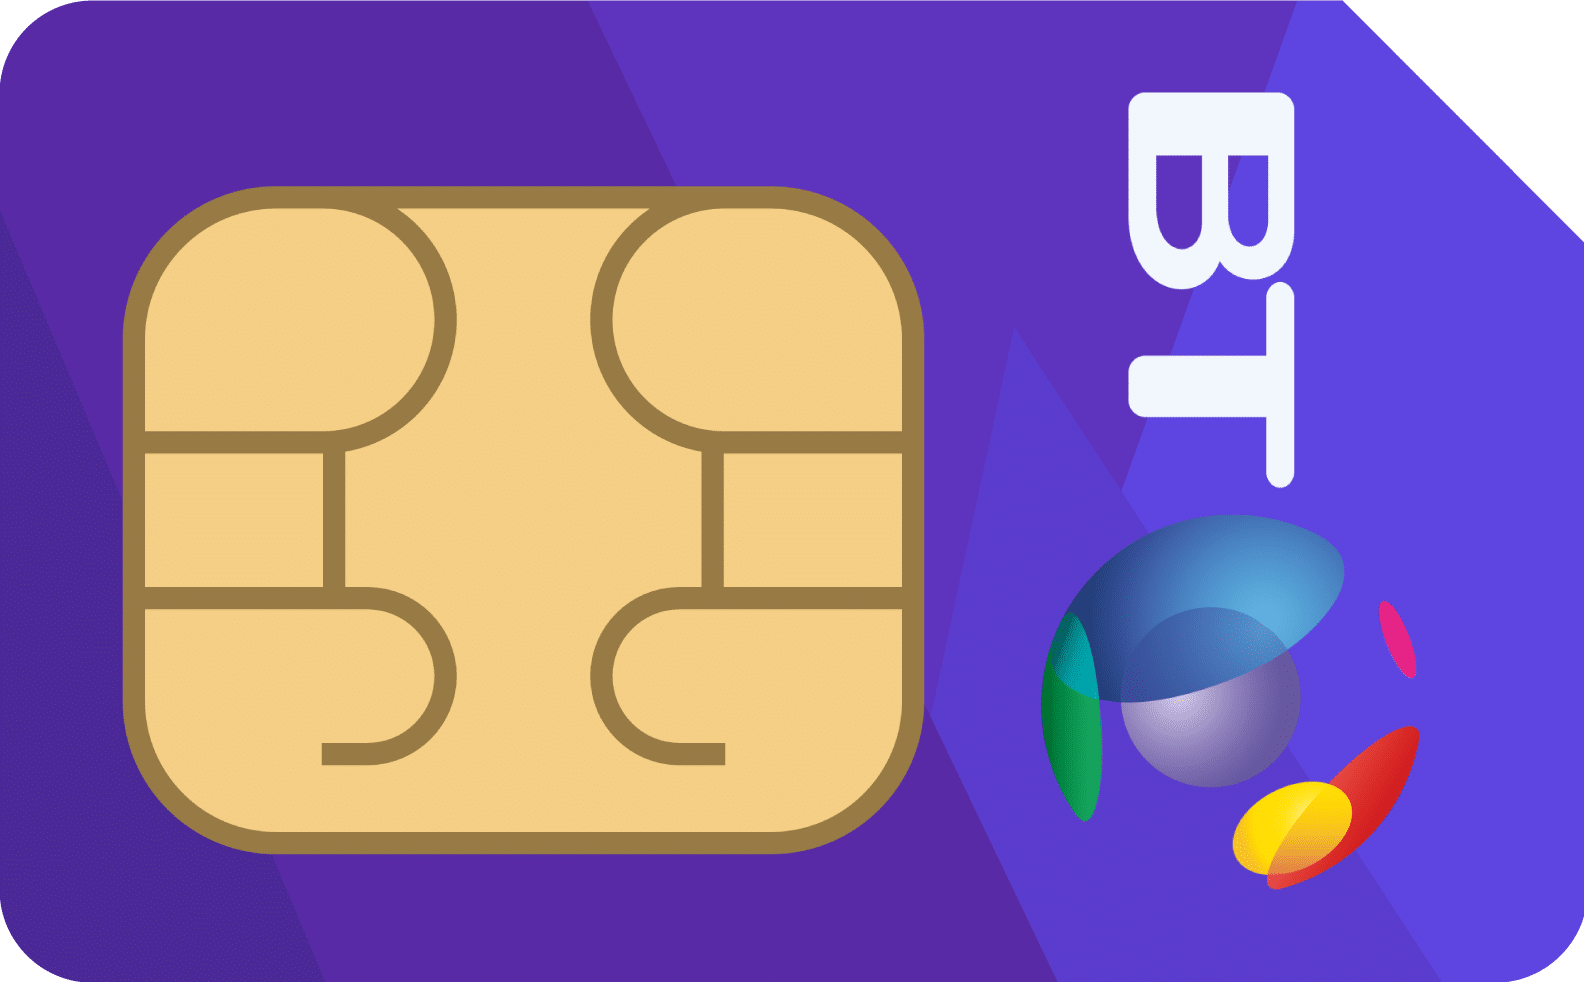 BT SIM Only Deals – Compare and Find The Best BT Mobile SIM Deals